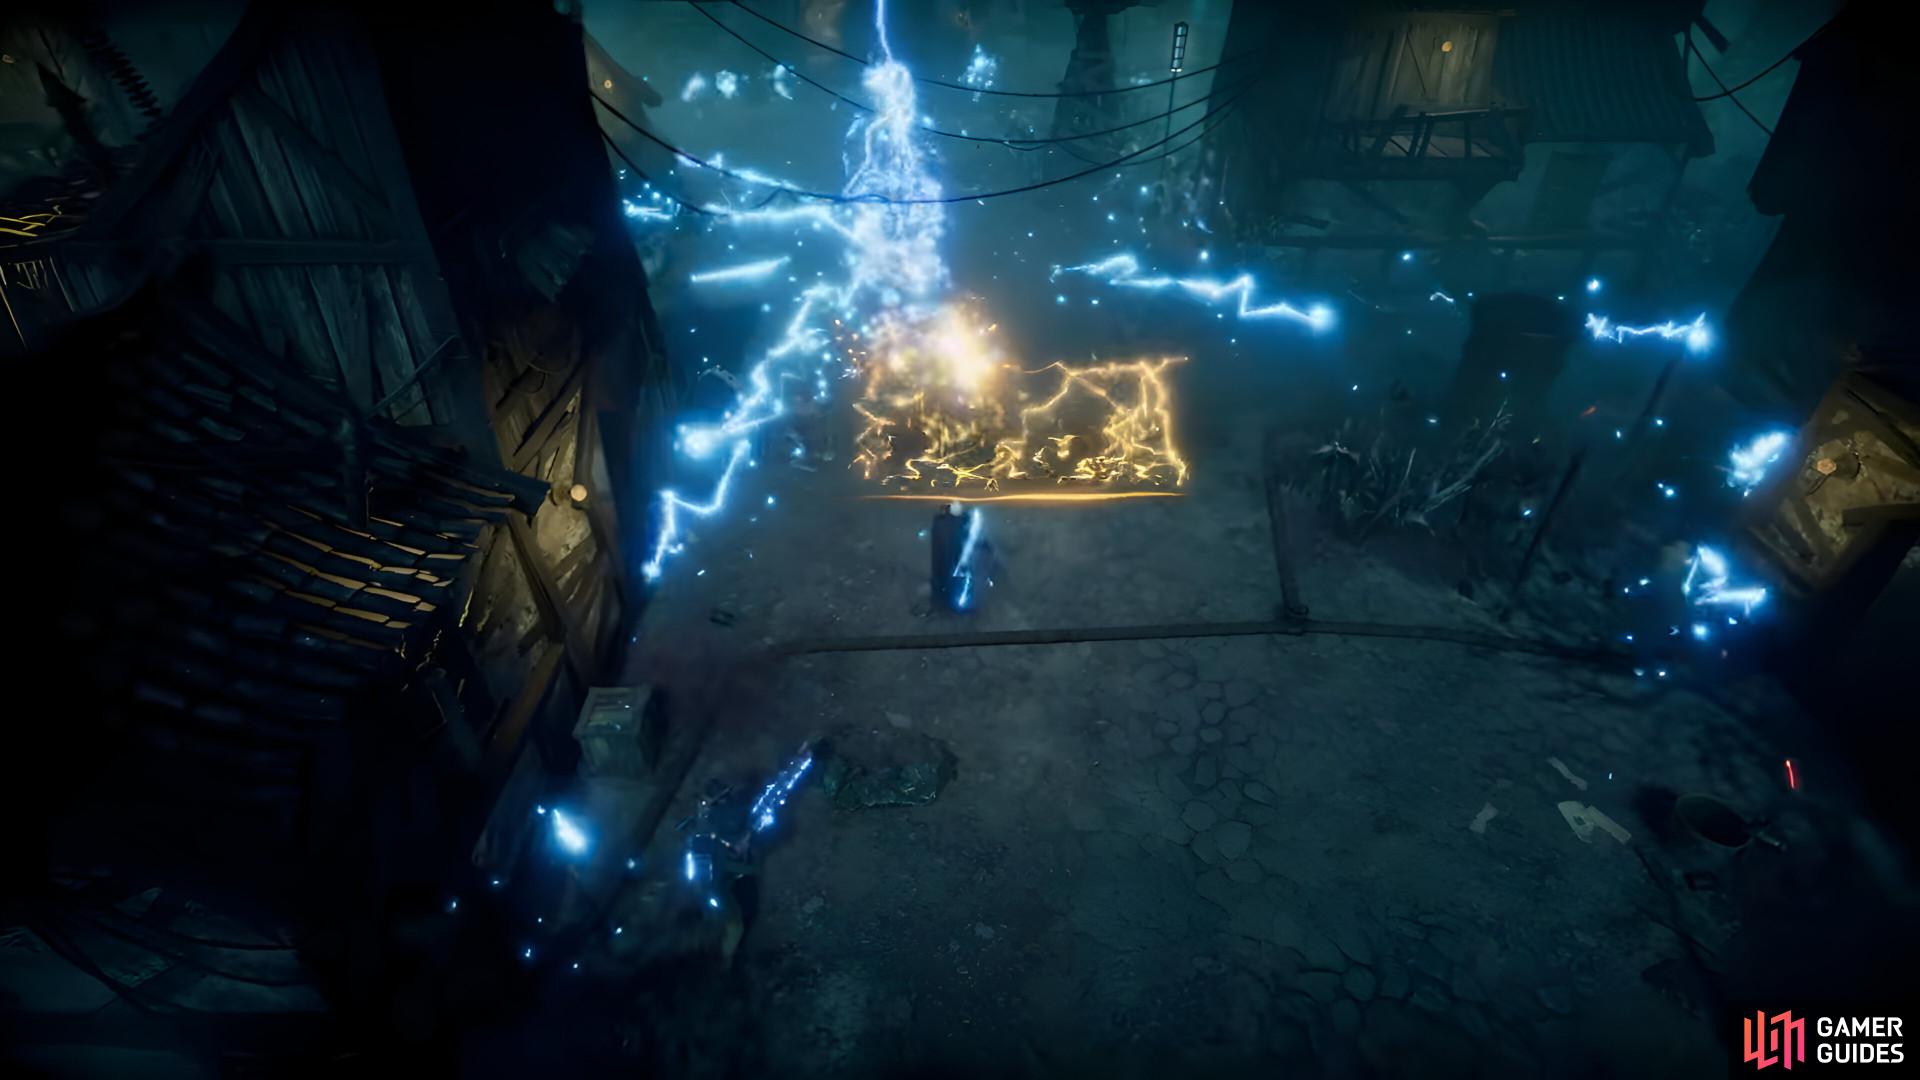 Shock Spells offer lots of ways to do big damage that rivals Chaos, along with some unique projectile-blocking mechanics like the lightning wall. Image via Stunlock Studios.